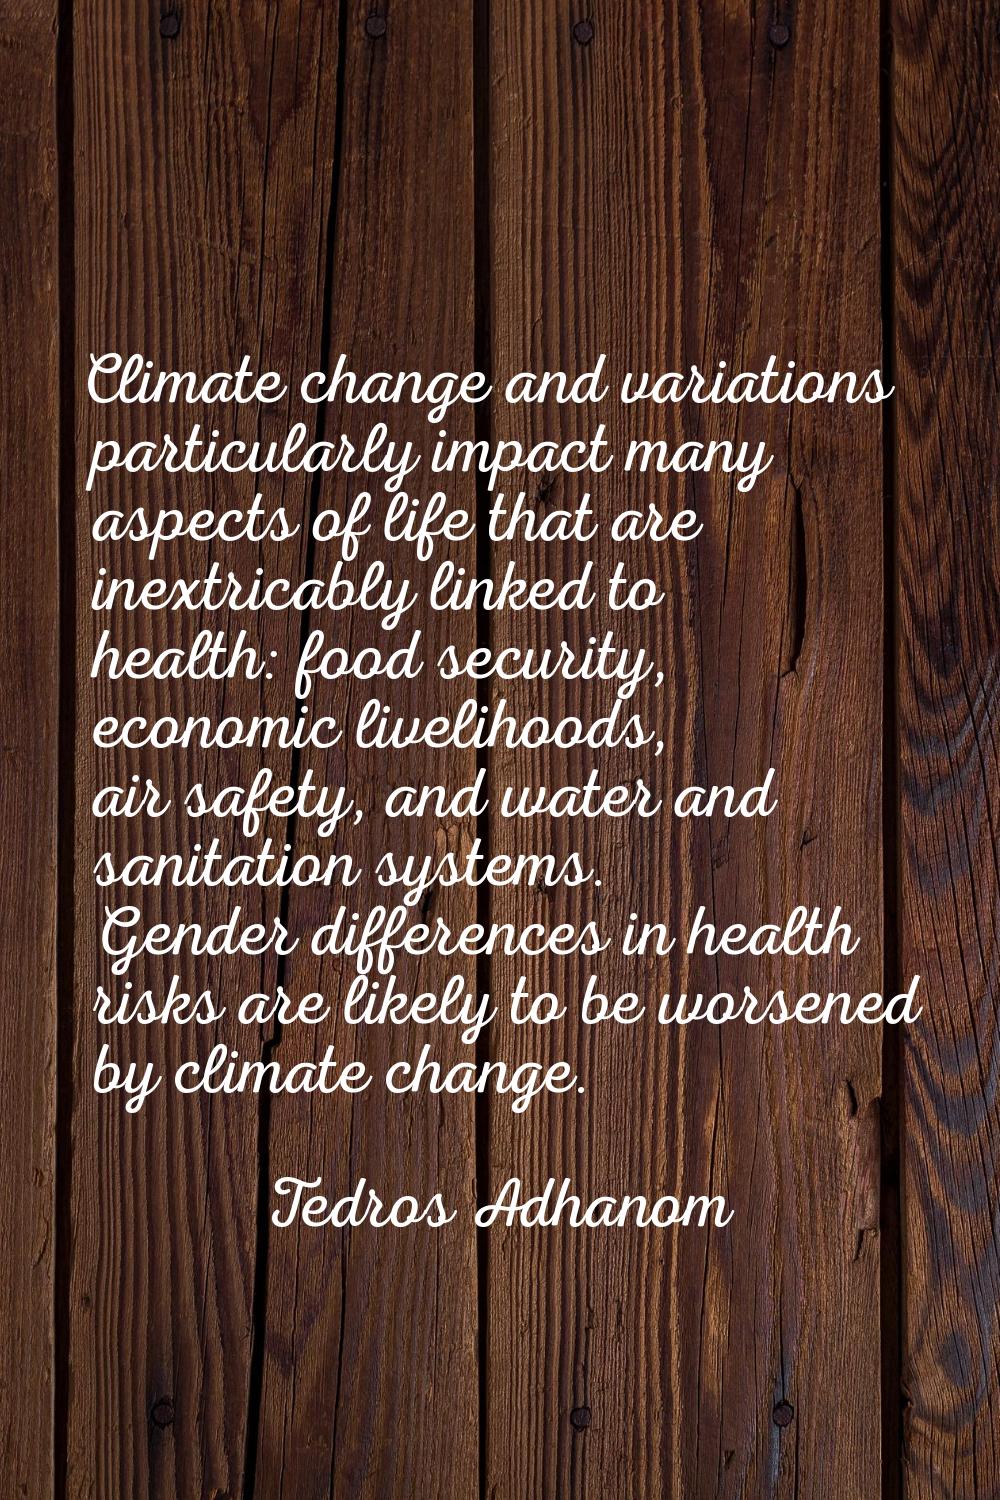 Climate change and variations particularly impact many aspects of life that are inextricably linked